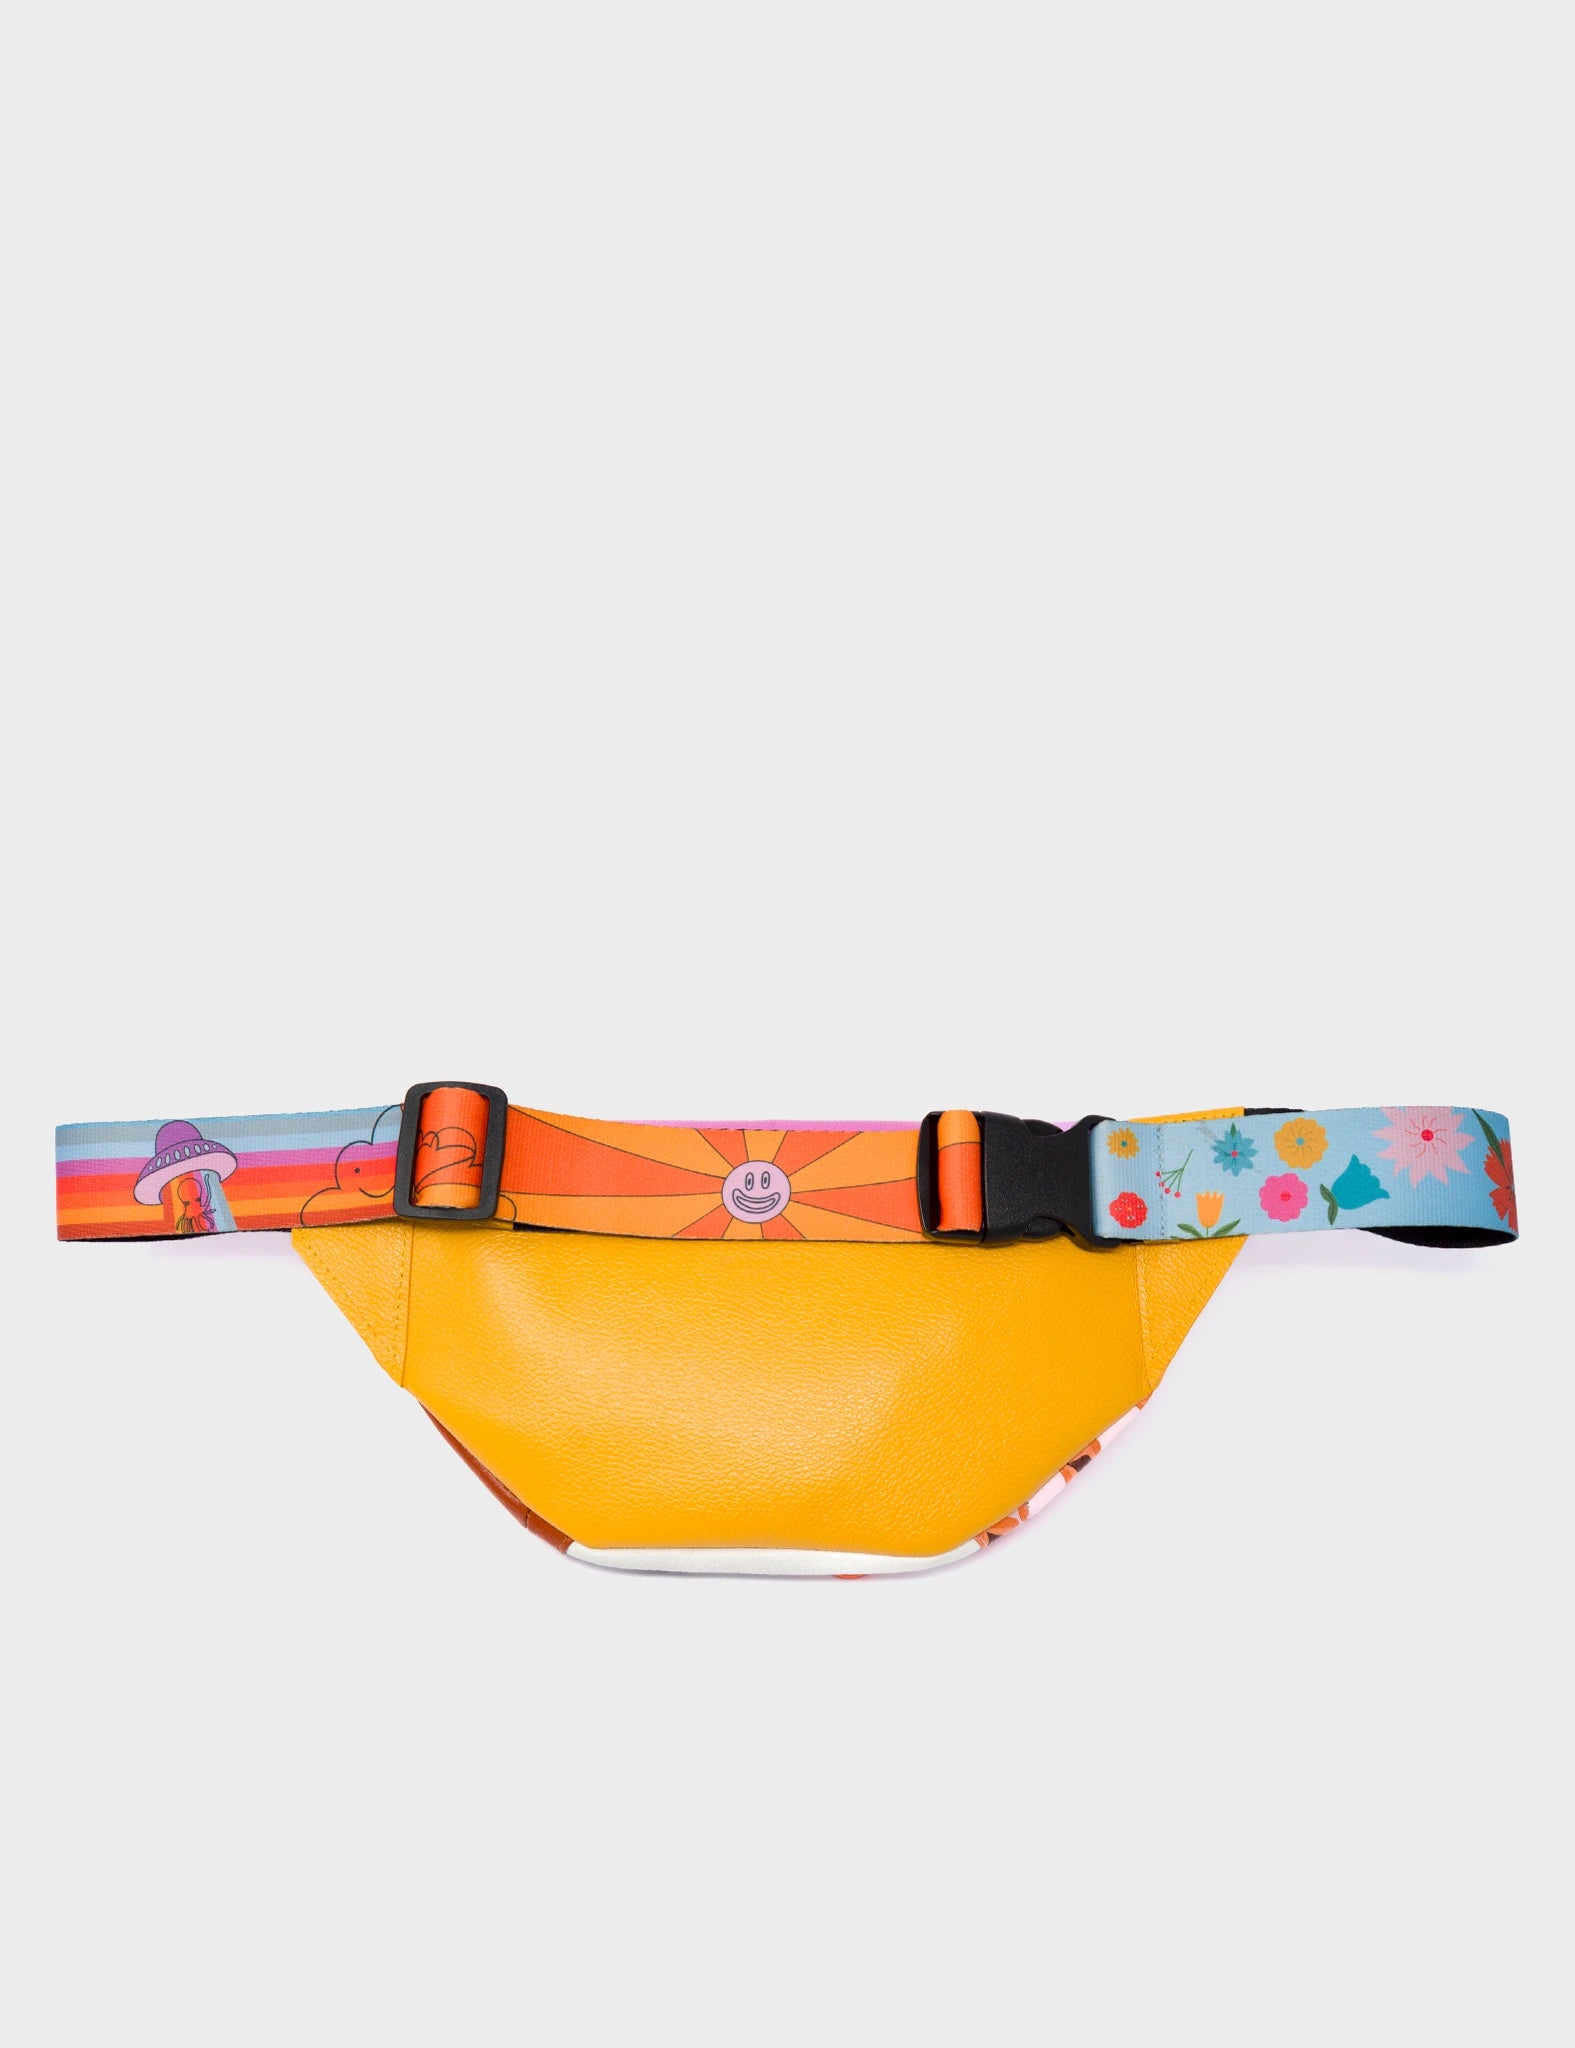 Fanny Pack Cream And Marigold Leather - Eyes Pattern Debossed - Back 